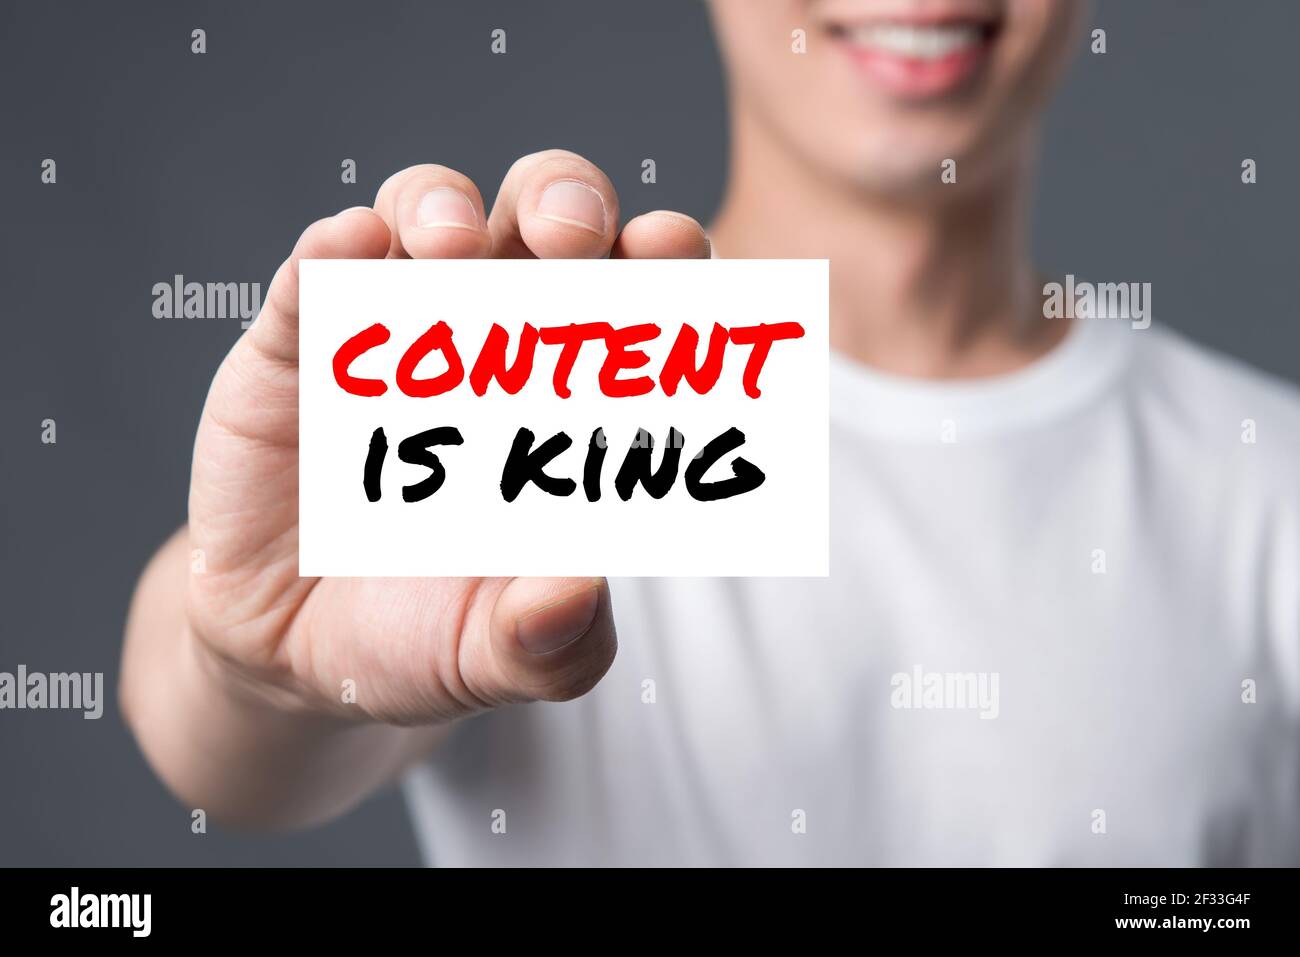 CONTENT IS KING, message on the card shown by a man Stock Photo